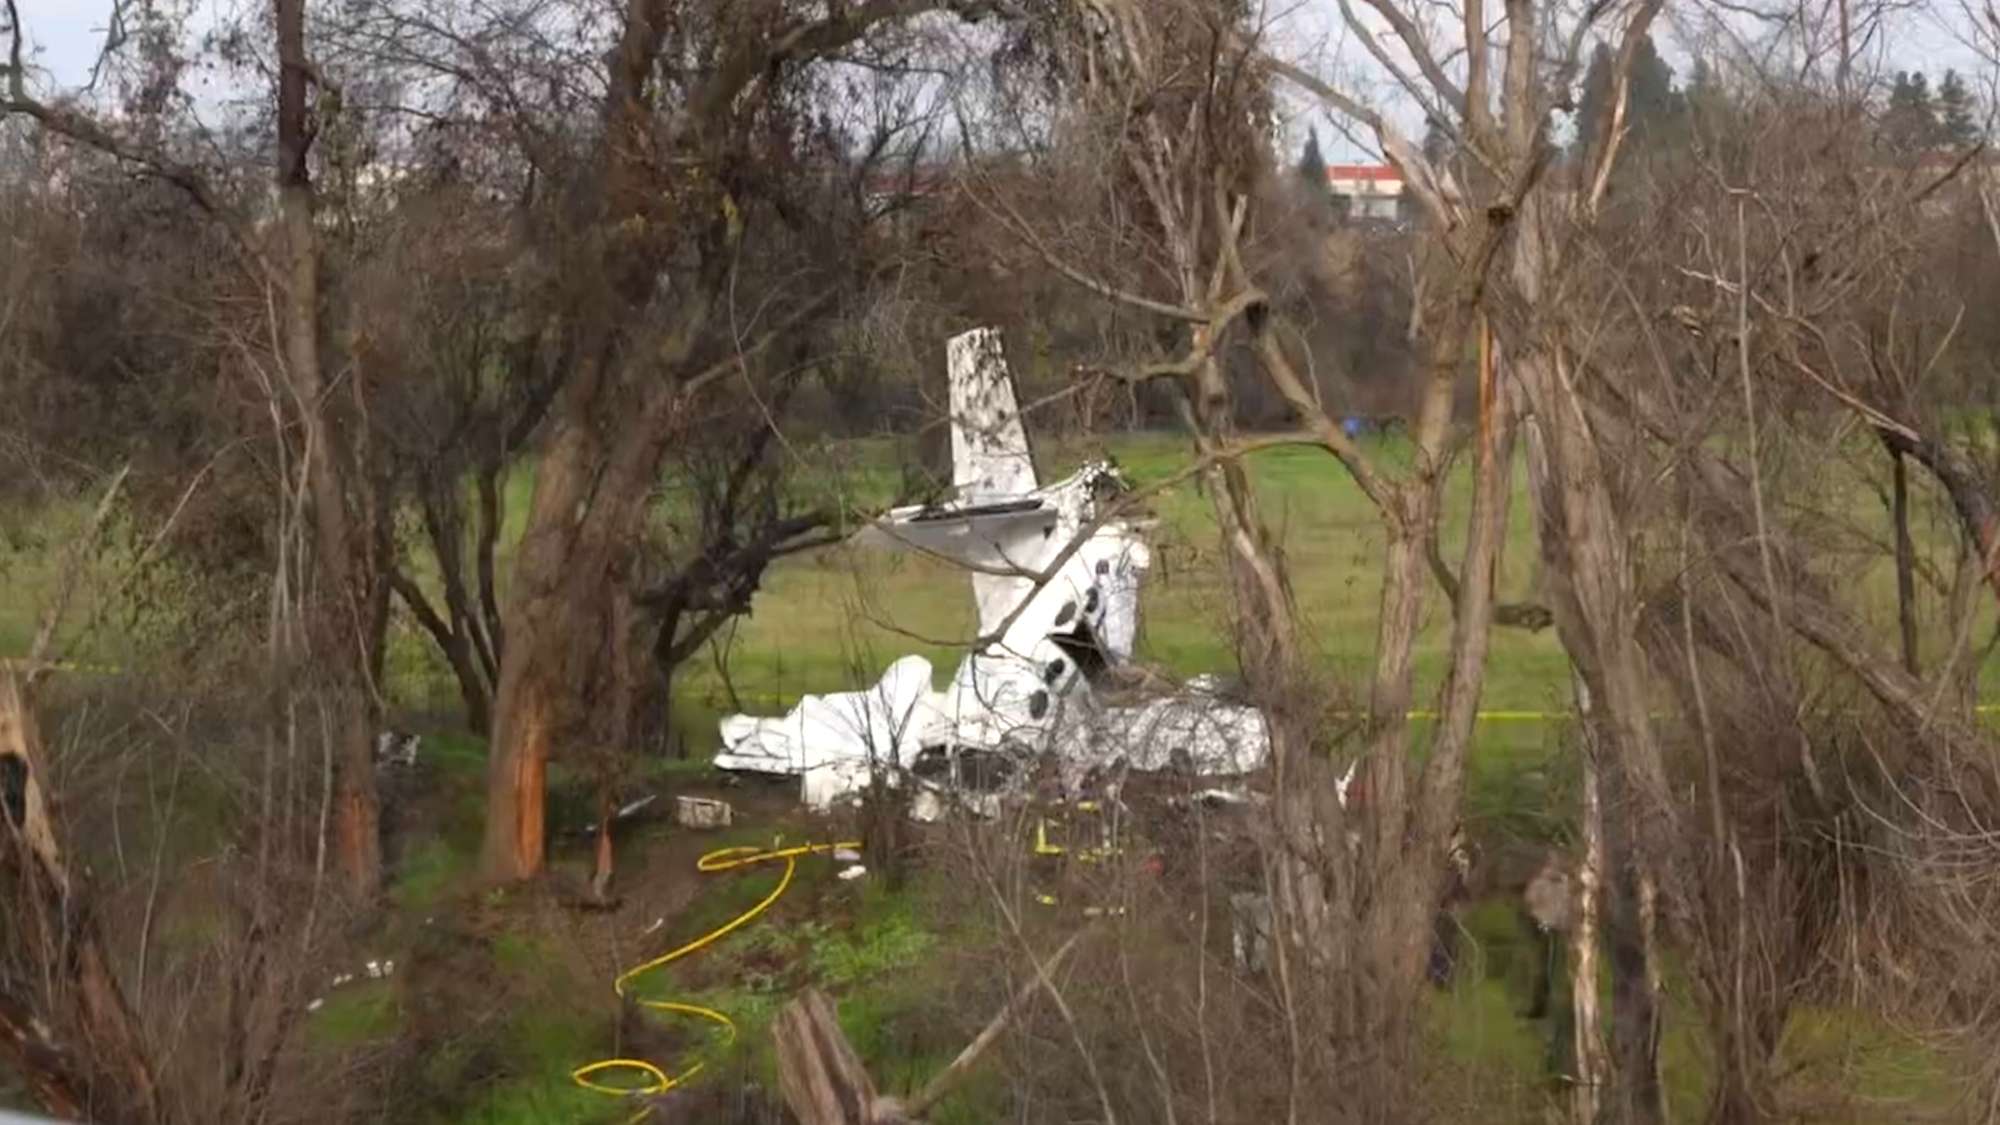 Read more about the article PLANE CRASH: Pilot Dies As Small Plane Wrecked In Crash Near Airport In California